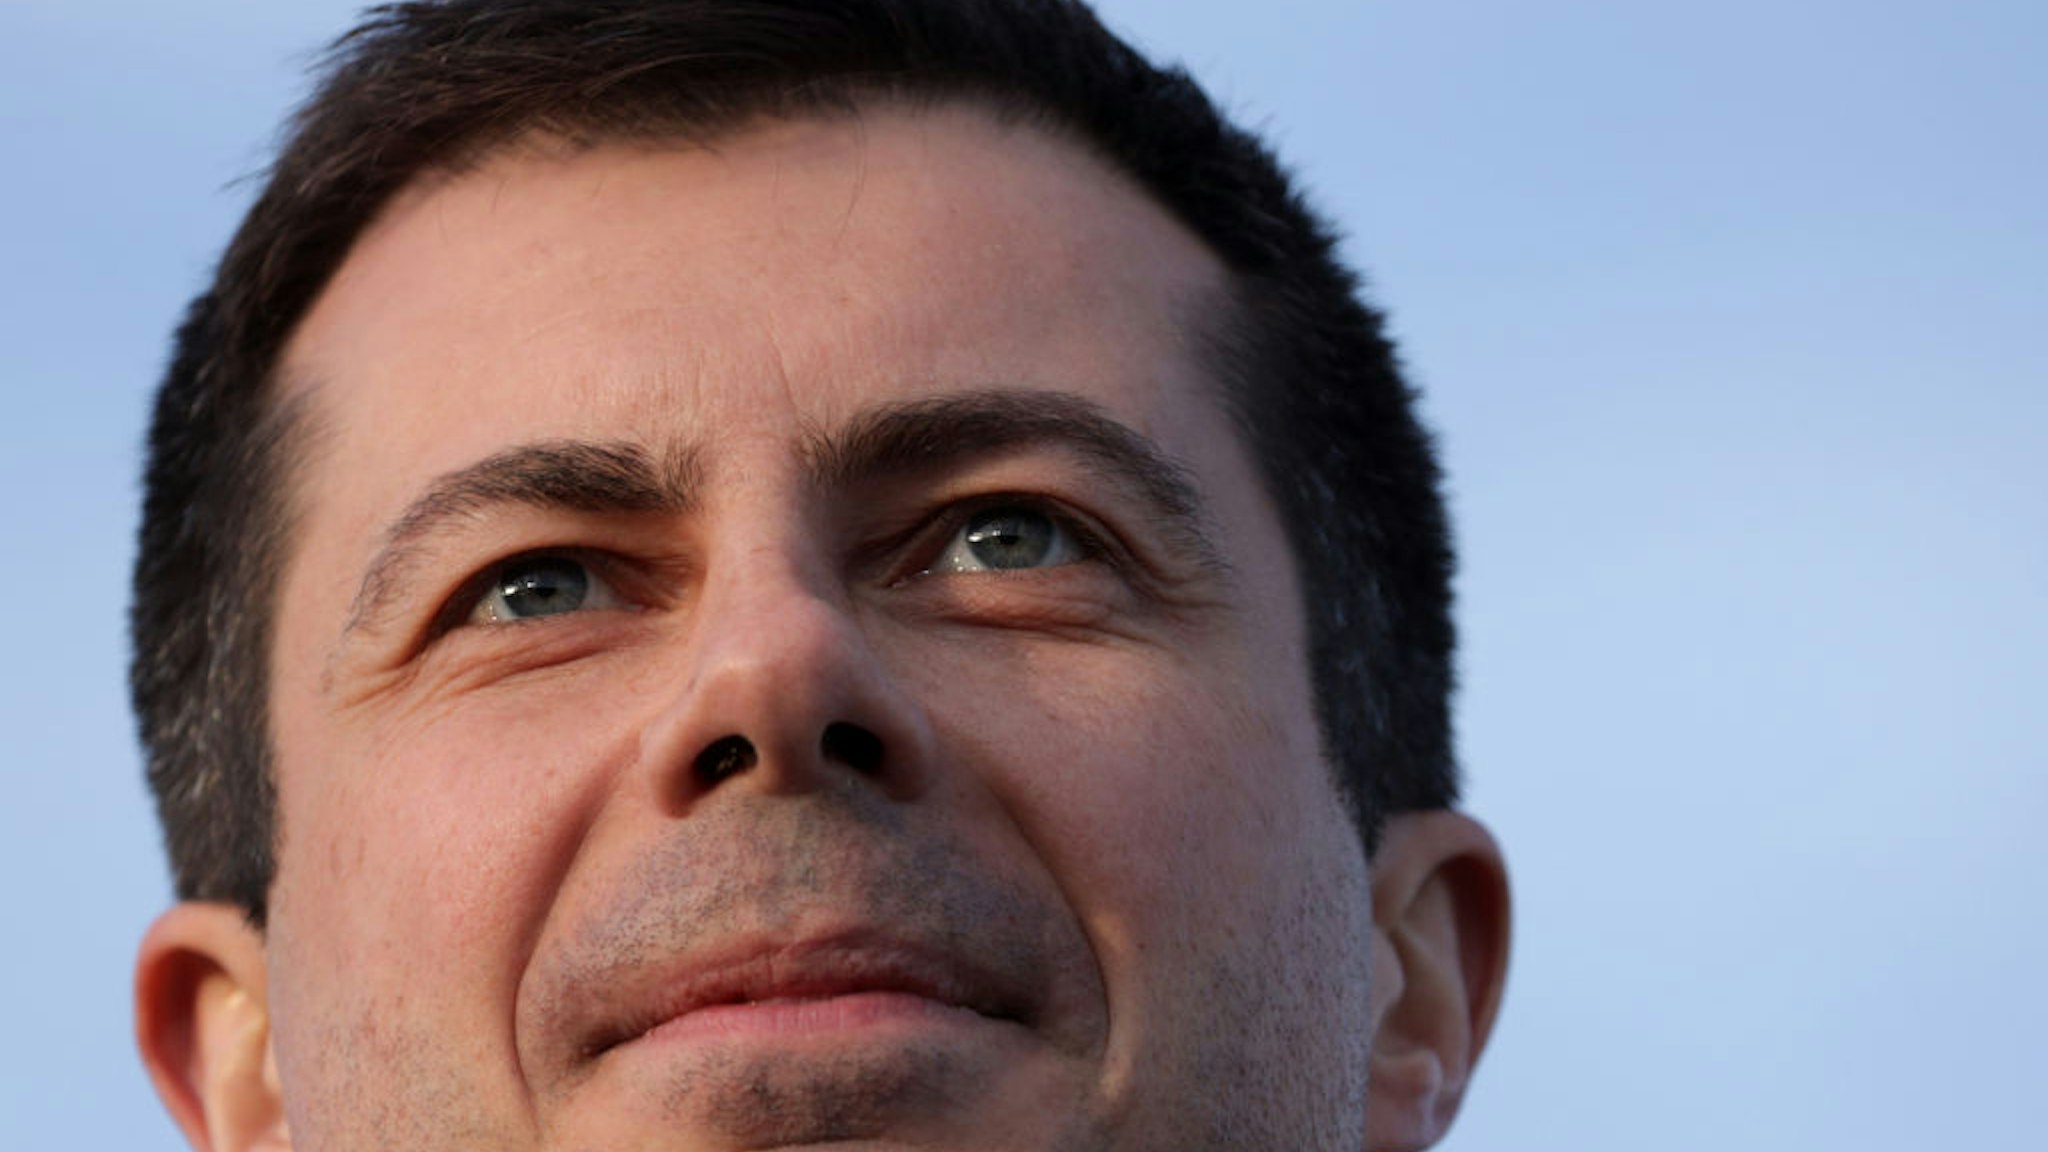 Democratic presidential candidate former South Bend, Indiana Mayor Pete Buttigieg pauses during a campaign town hall event at Washington Liberty High School February 23, 2020 in Arlington, Virginia.